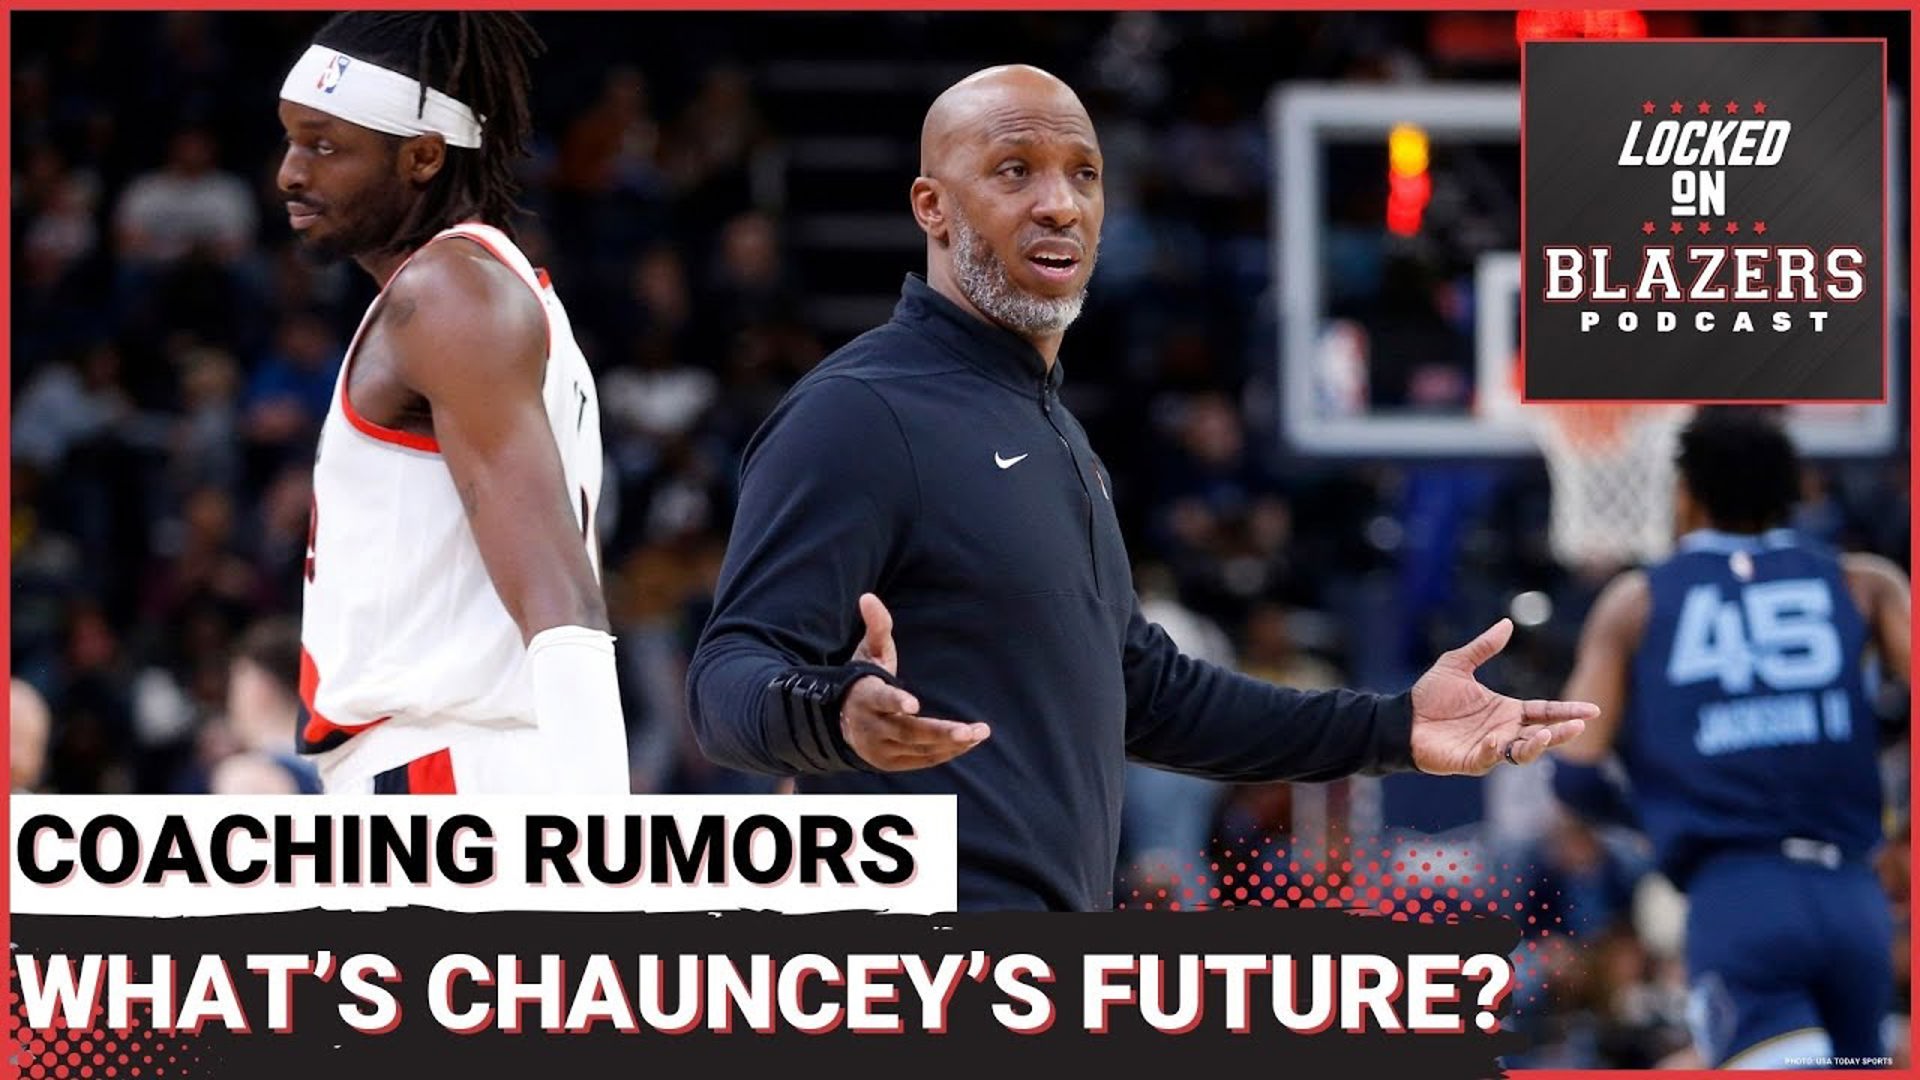 NBA teams are "monitoring" Chauncey Billups' situation with the Portland Trail Blazers.